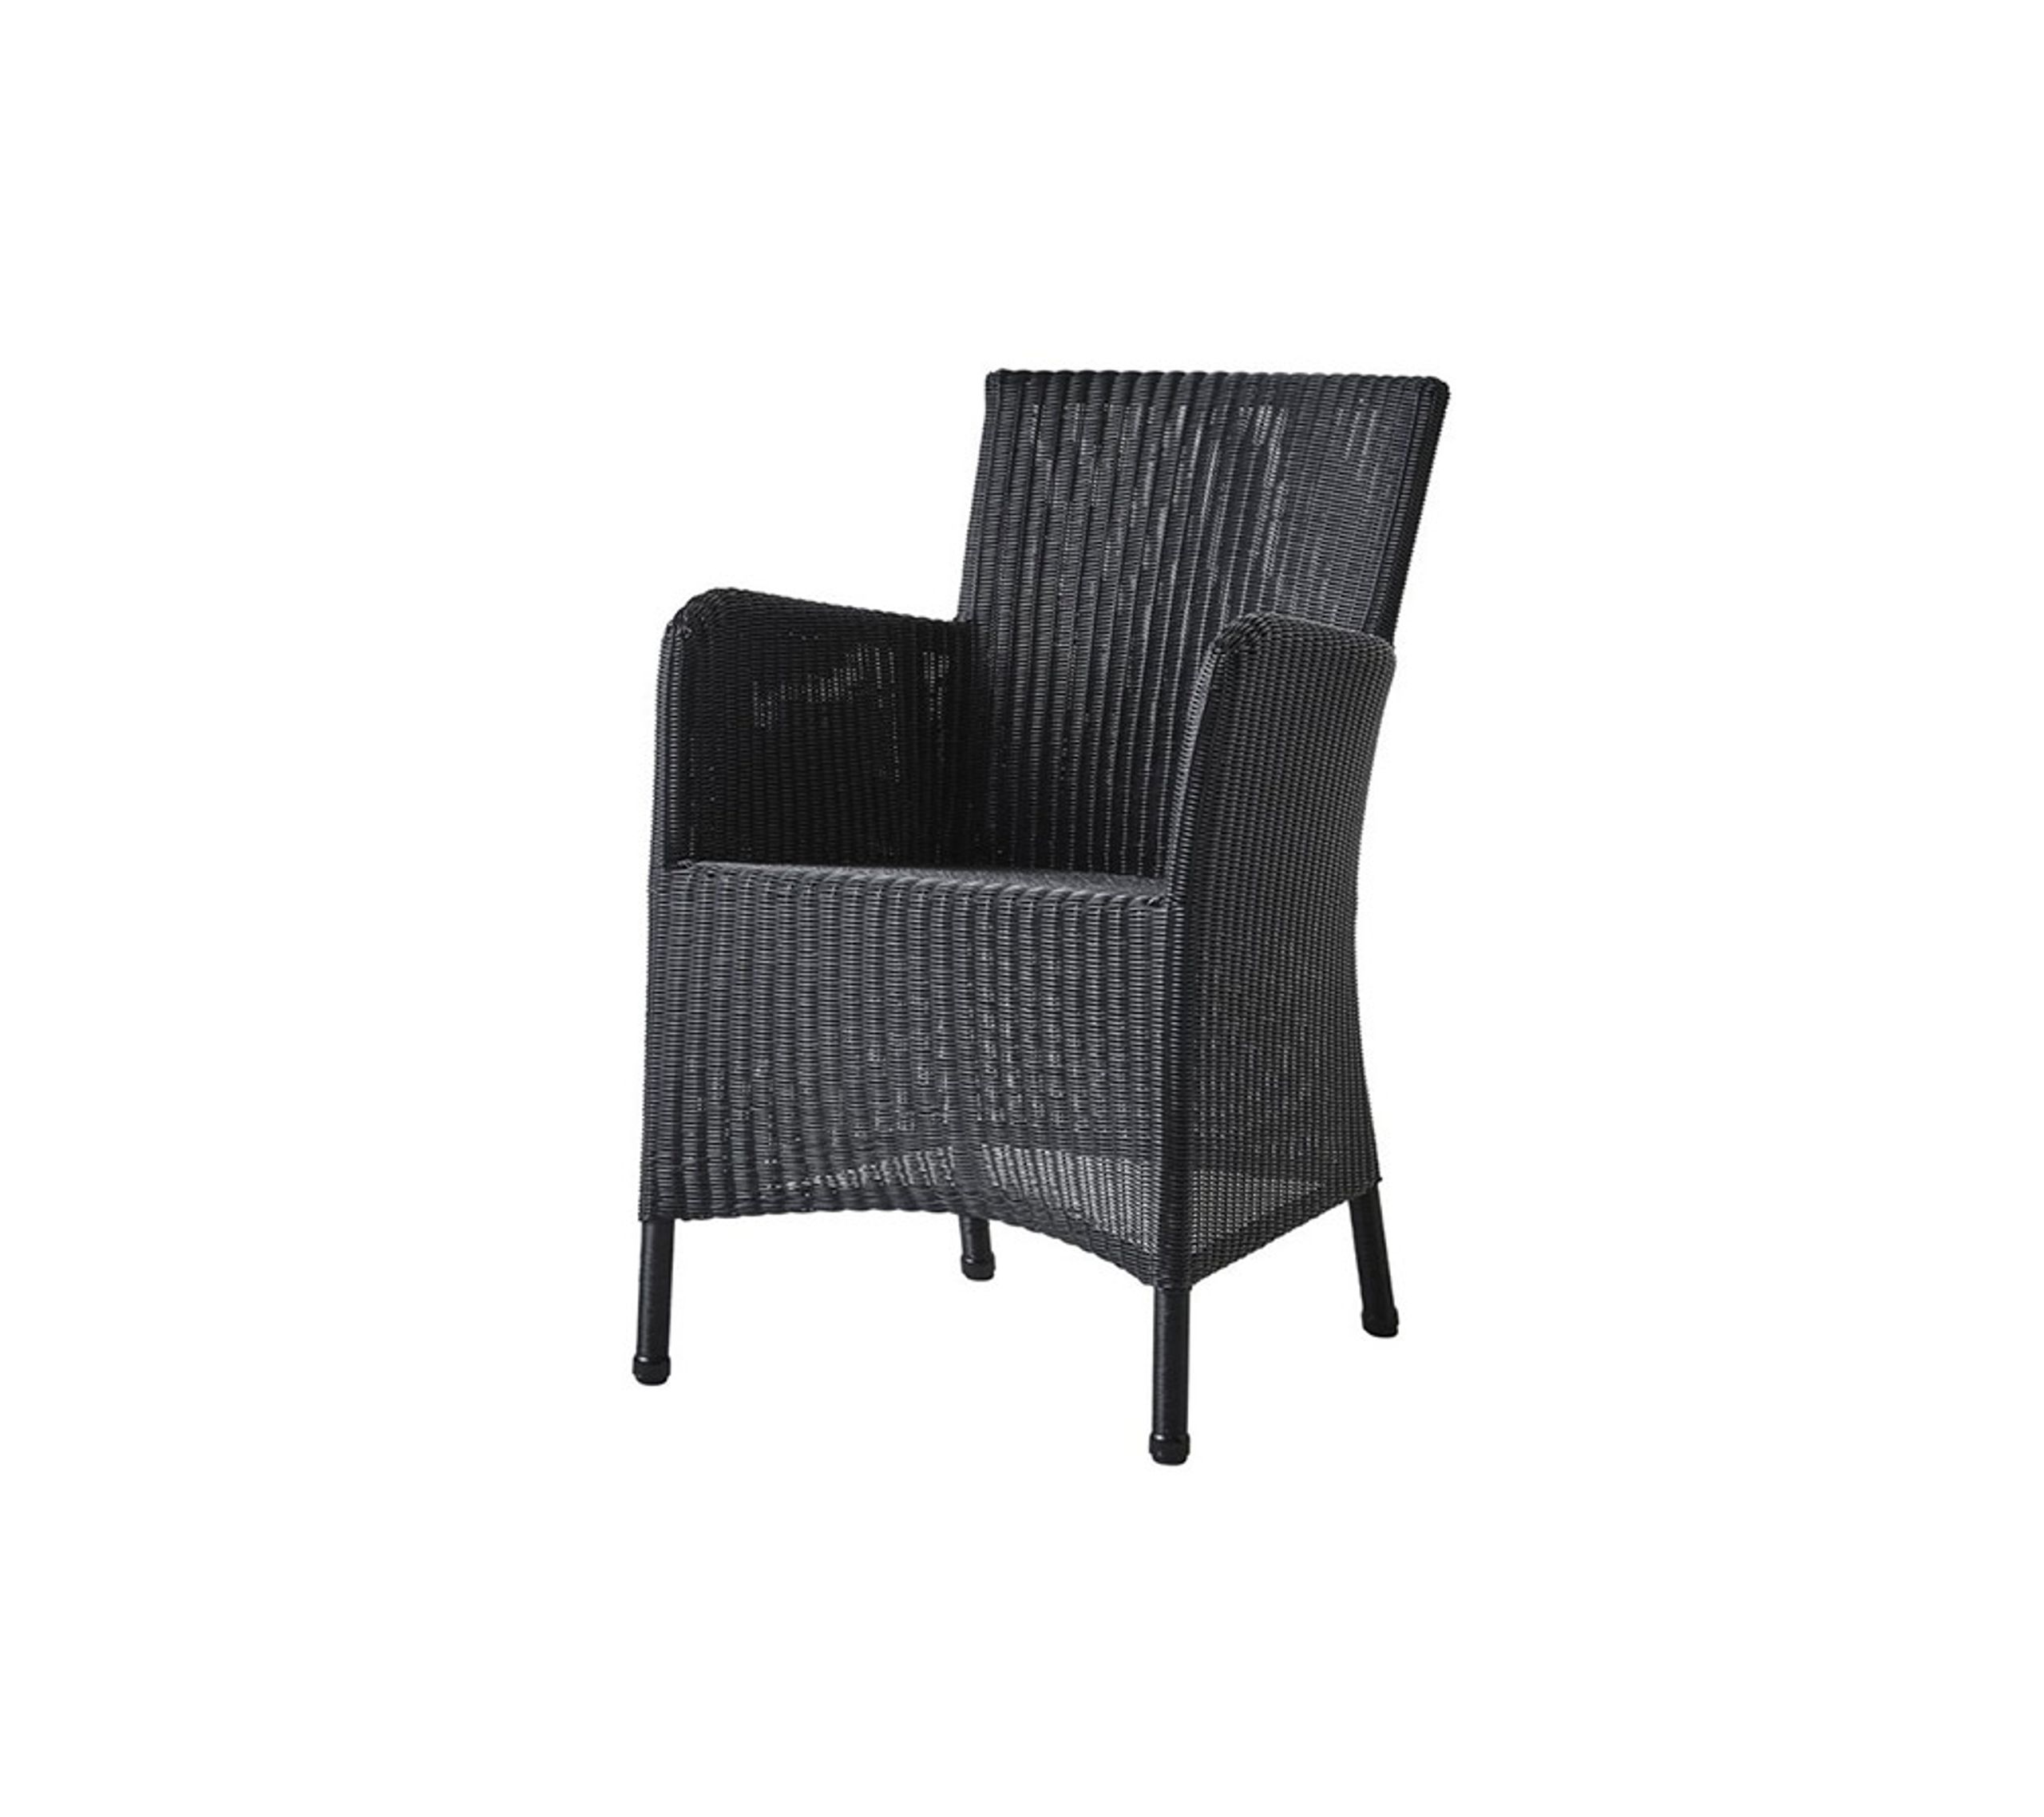 Cane-line - Stoel - Hampsted Chair - Black Cane-line Weave